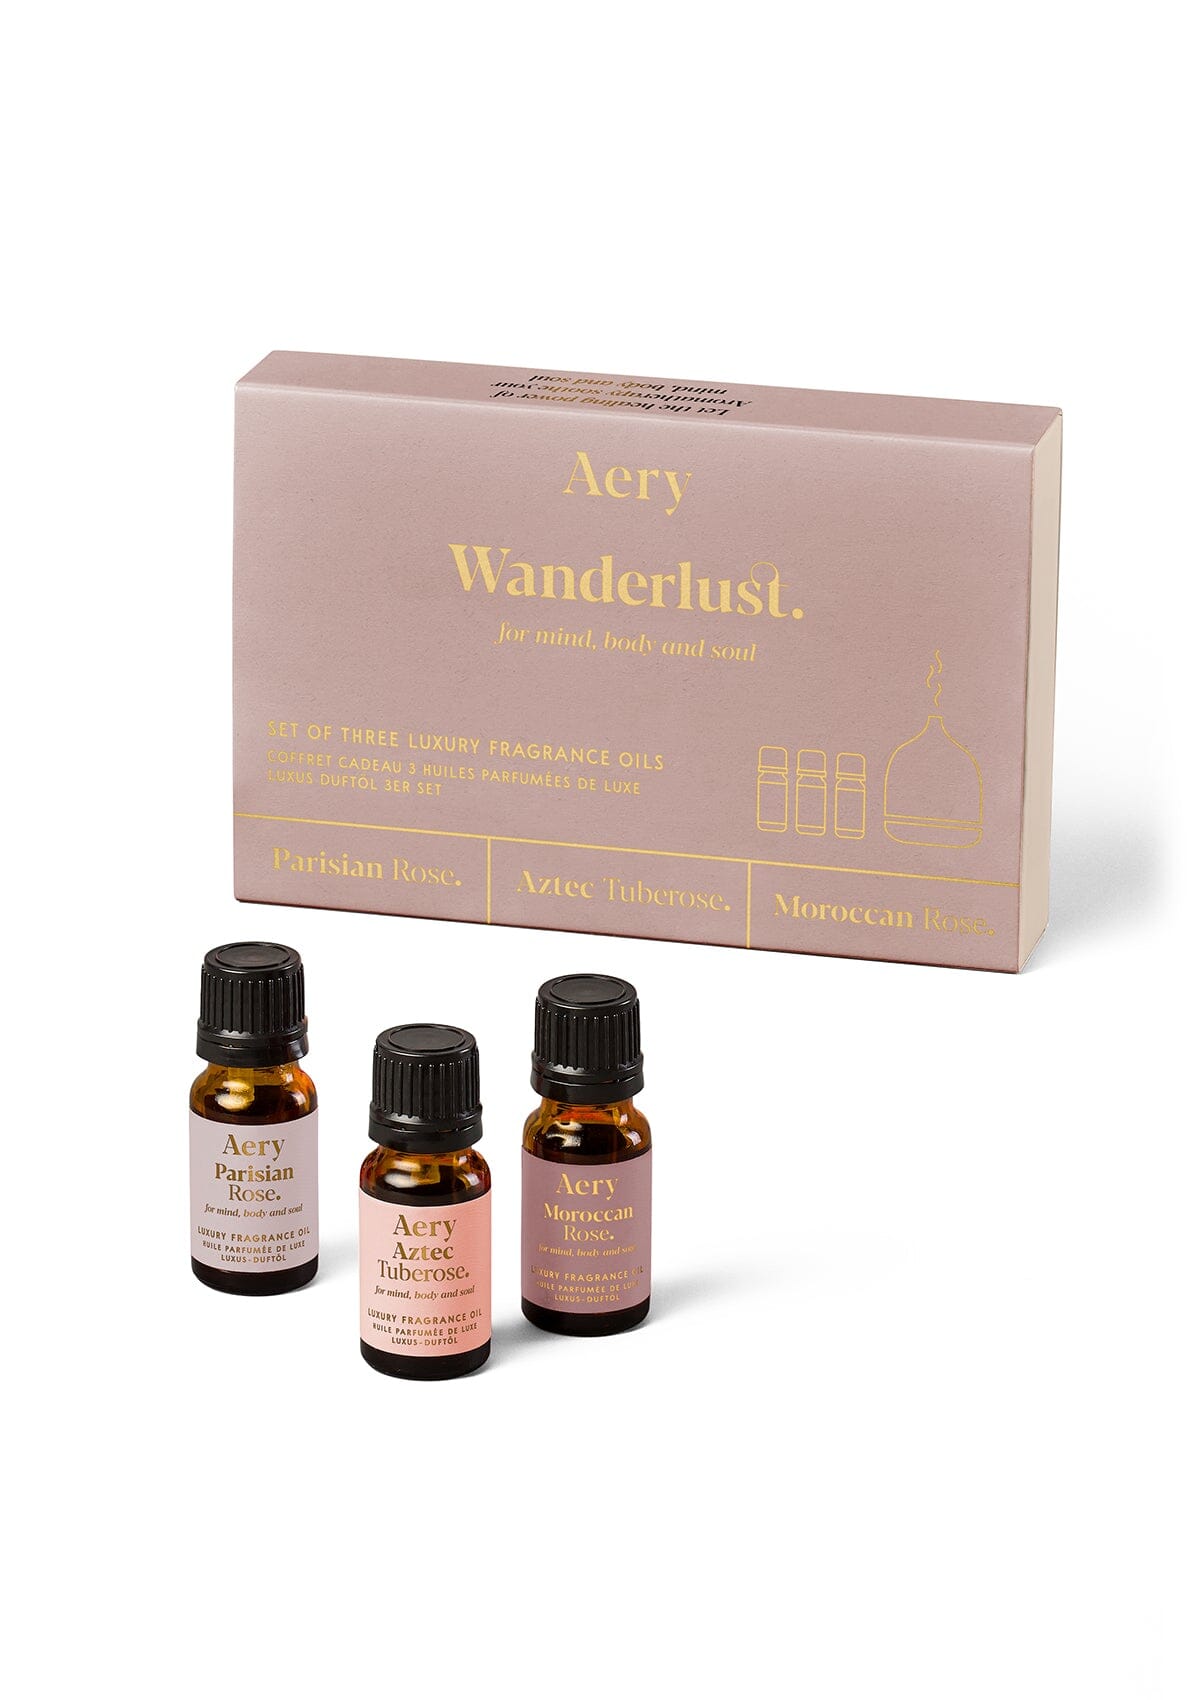 Pink Wanderlust fragrance oil set of three displayed next to product packaging by Aery on white background 